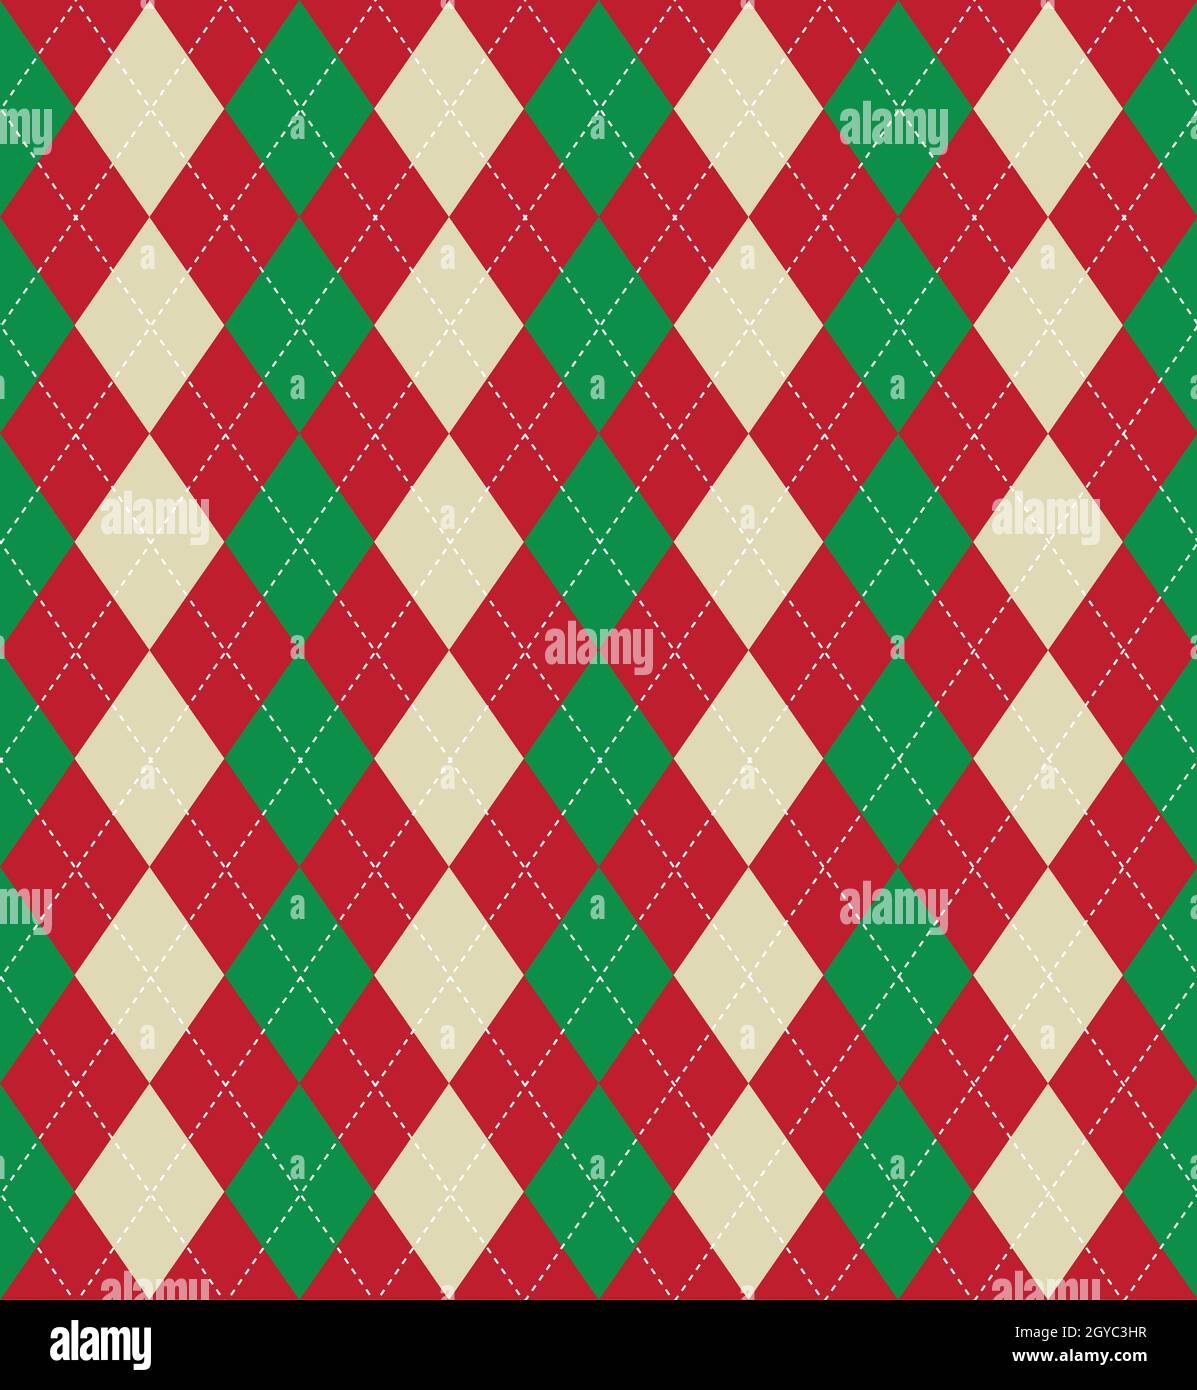 Seamless tiled background of an argyle style pattern using Christmas colours Stock Photo